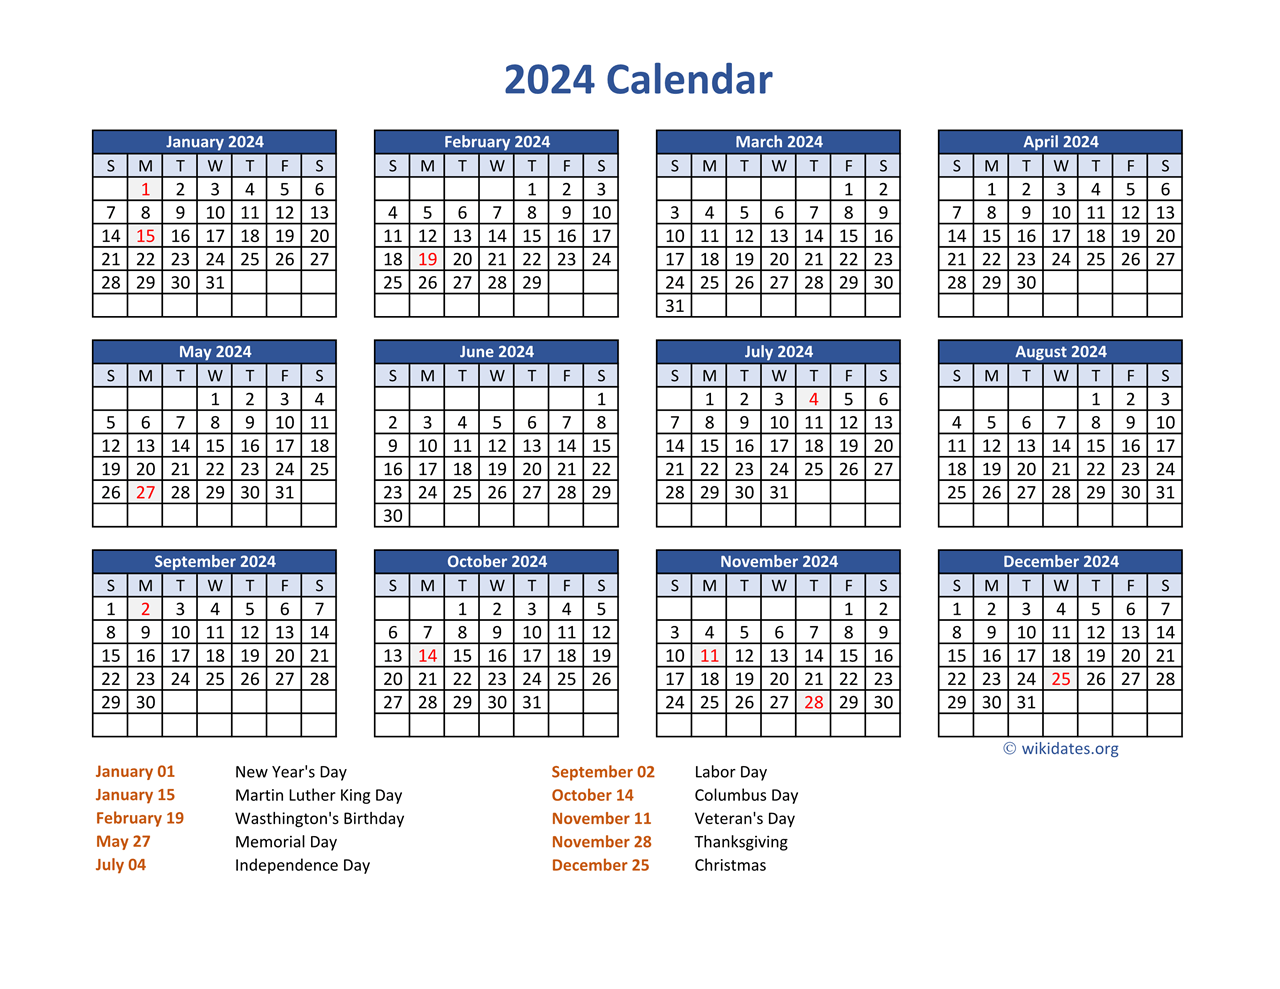 Pdf Calendar 2024 With Federal Holidays | Wikidates for Free 2024 Calendar Printable With Holidays